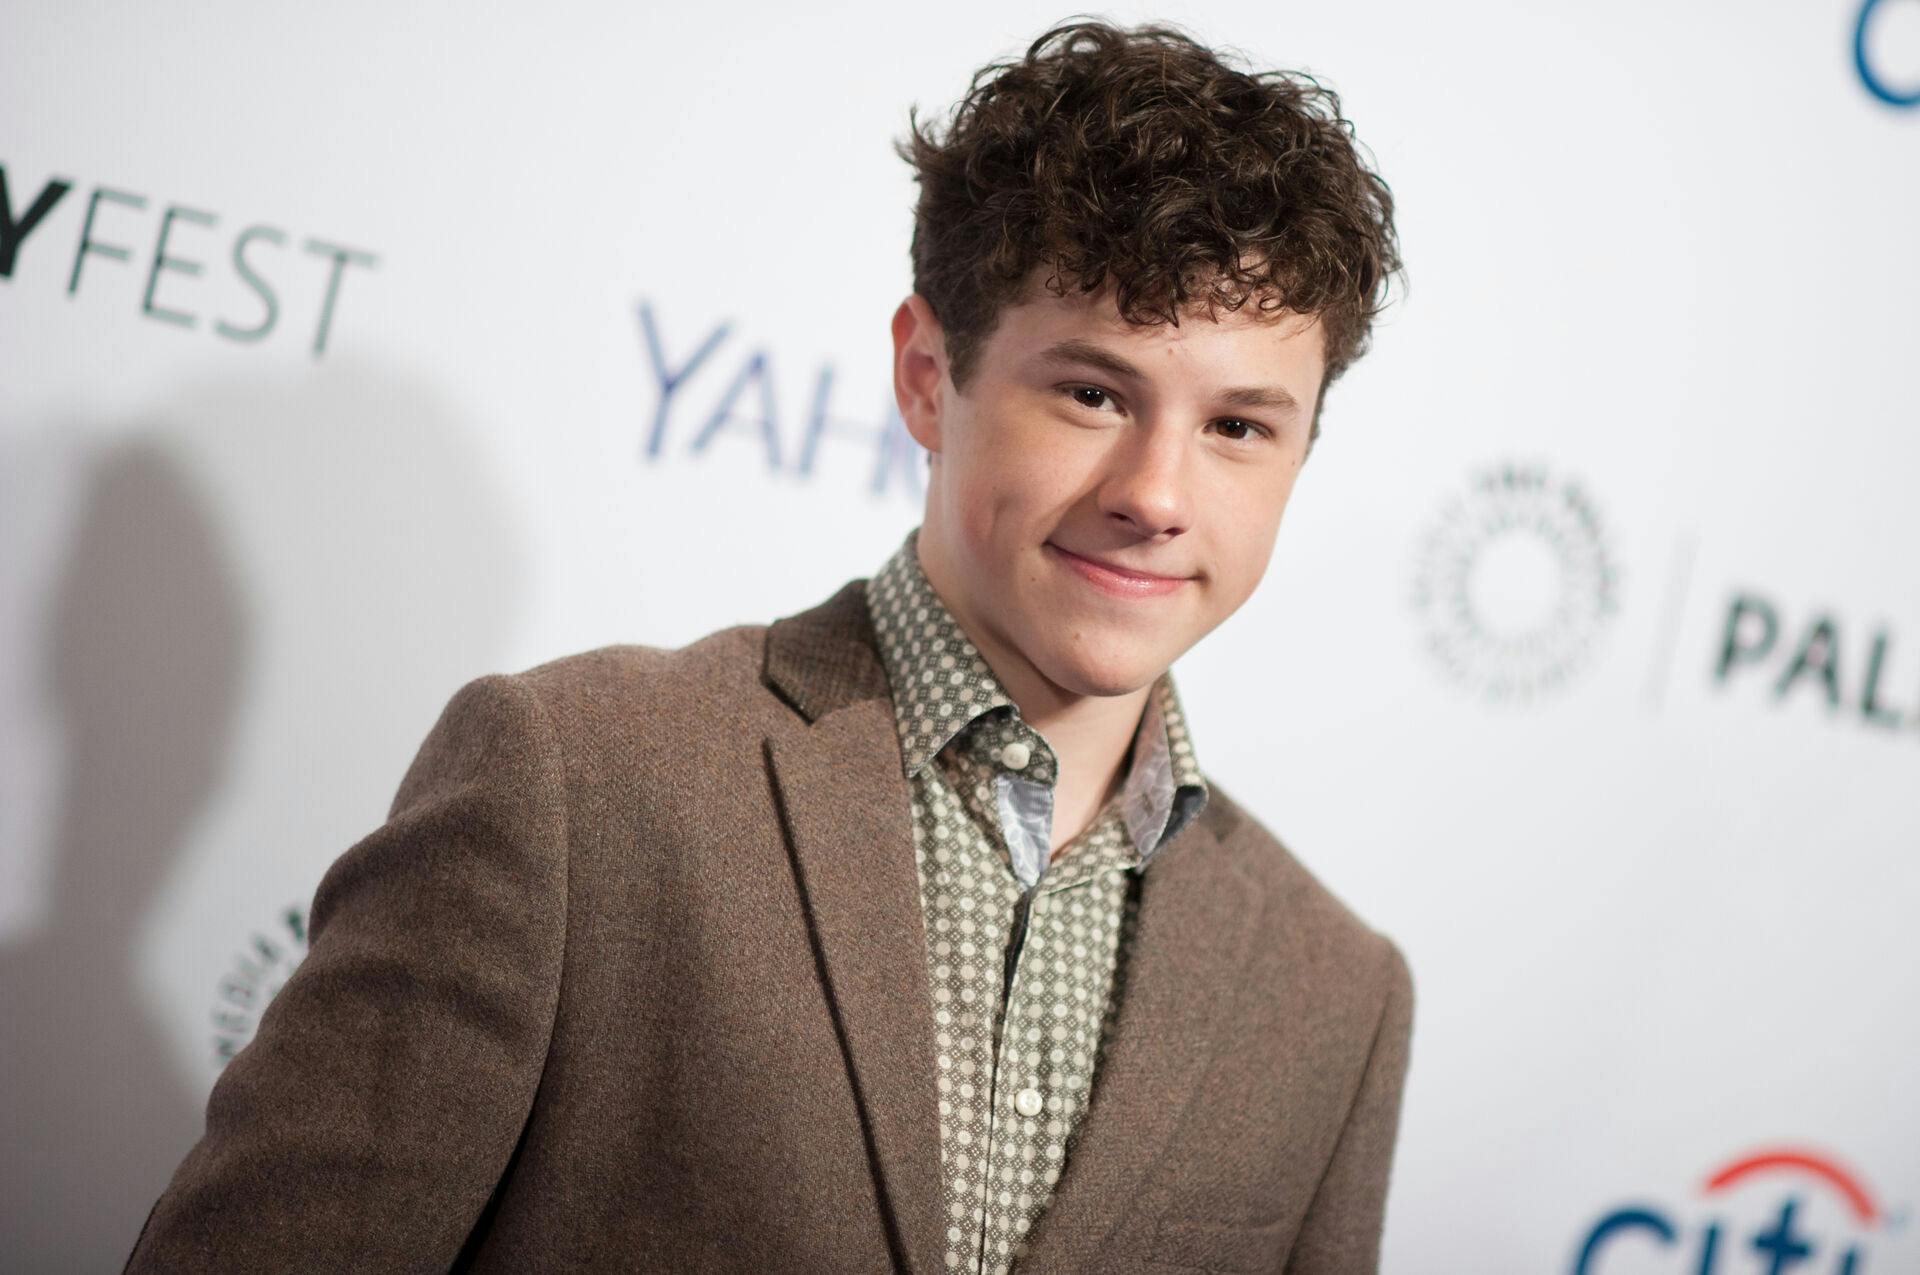 Nolan Gould arrives at the 32nd Annual Paleyfest : "Modern Family" held at The Dolby Theatre on Saturday, March 14, 2015, in Los Angeles. (Photo by Richard Shotwell/Invision/AP)